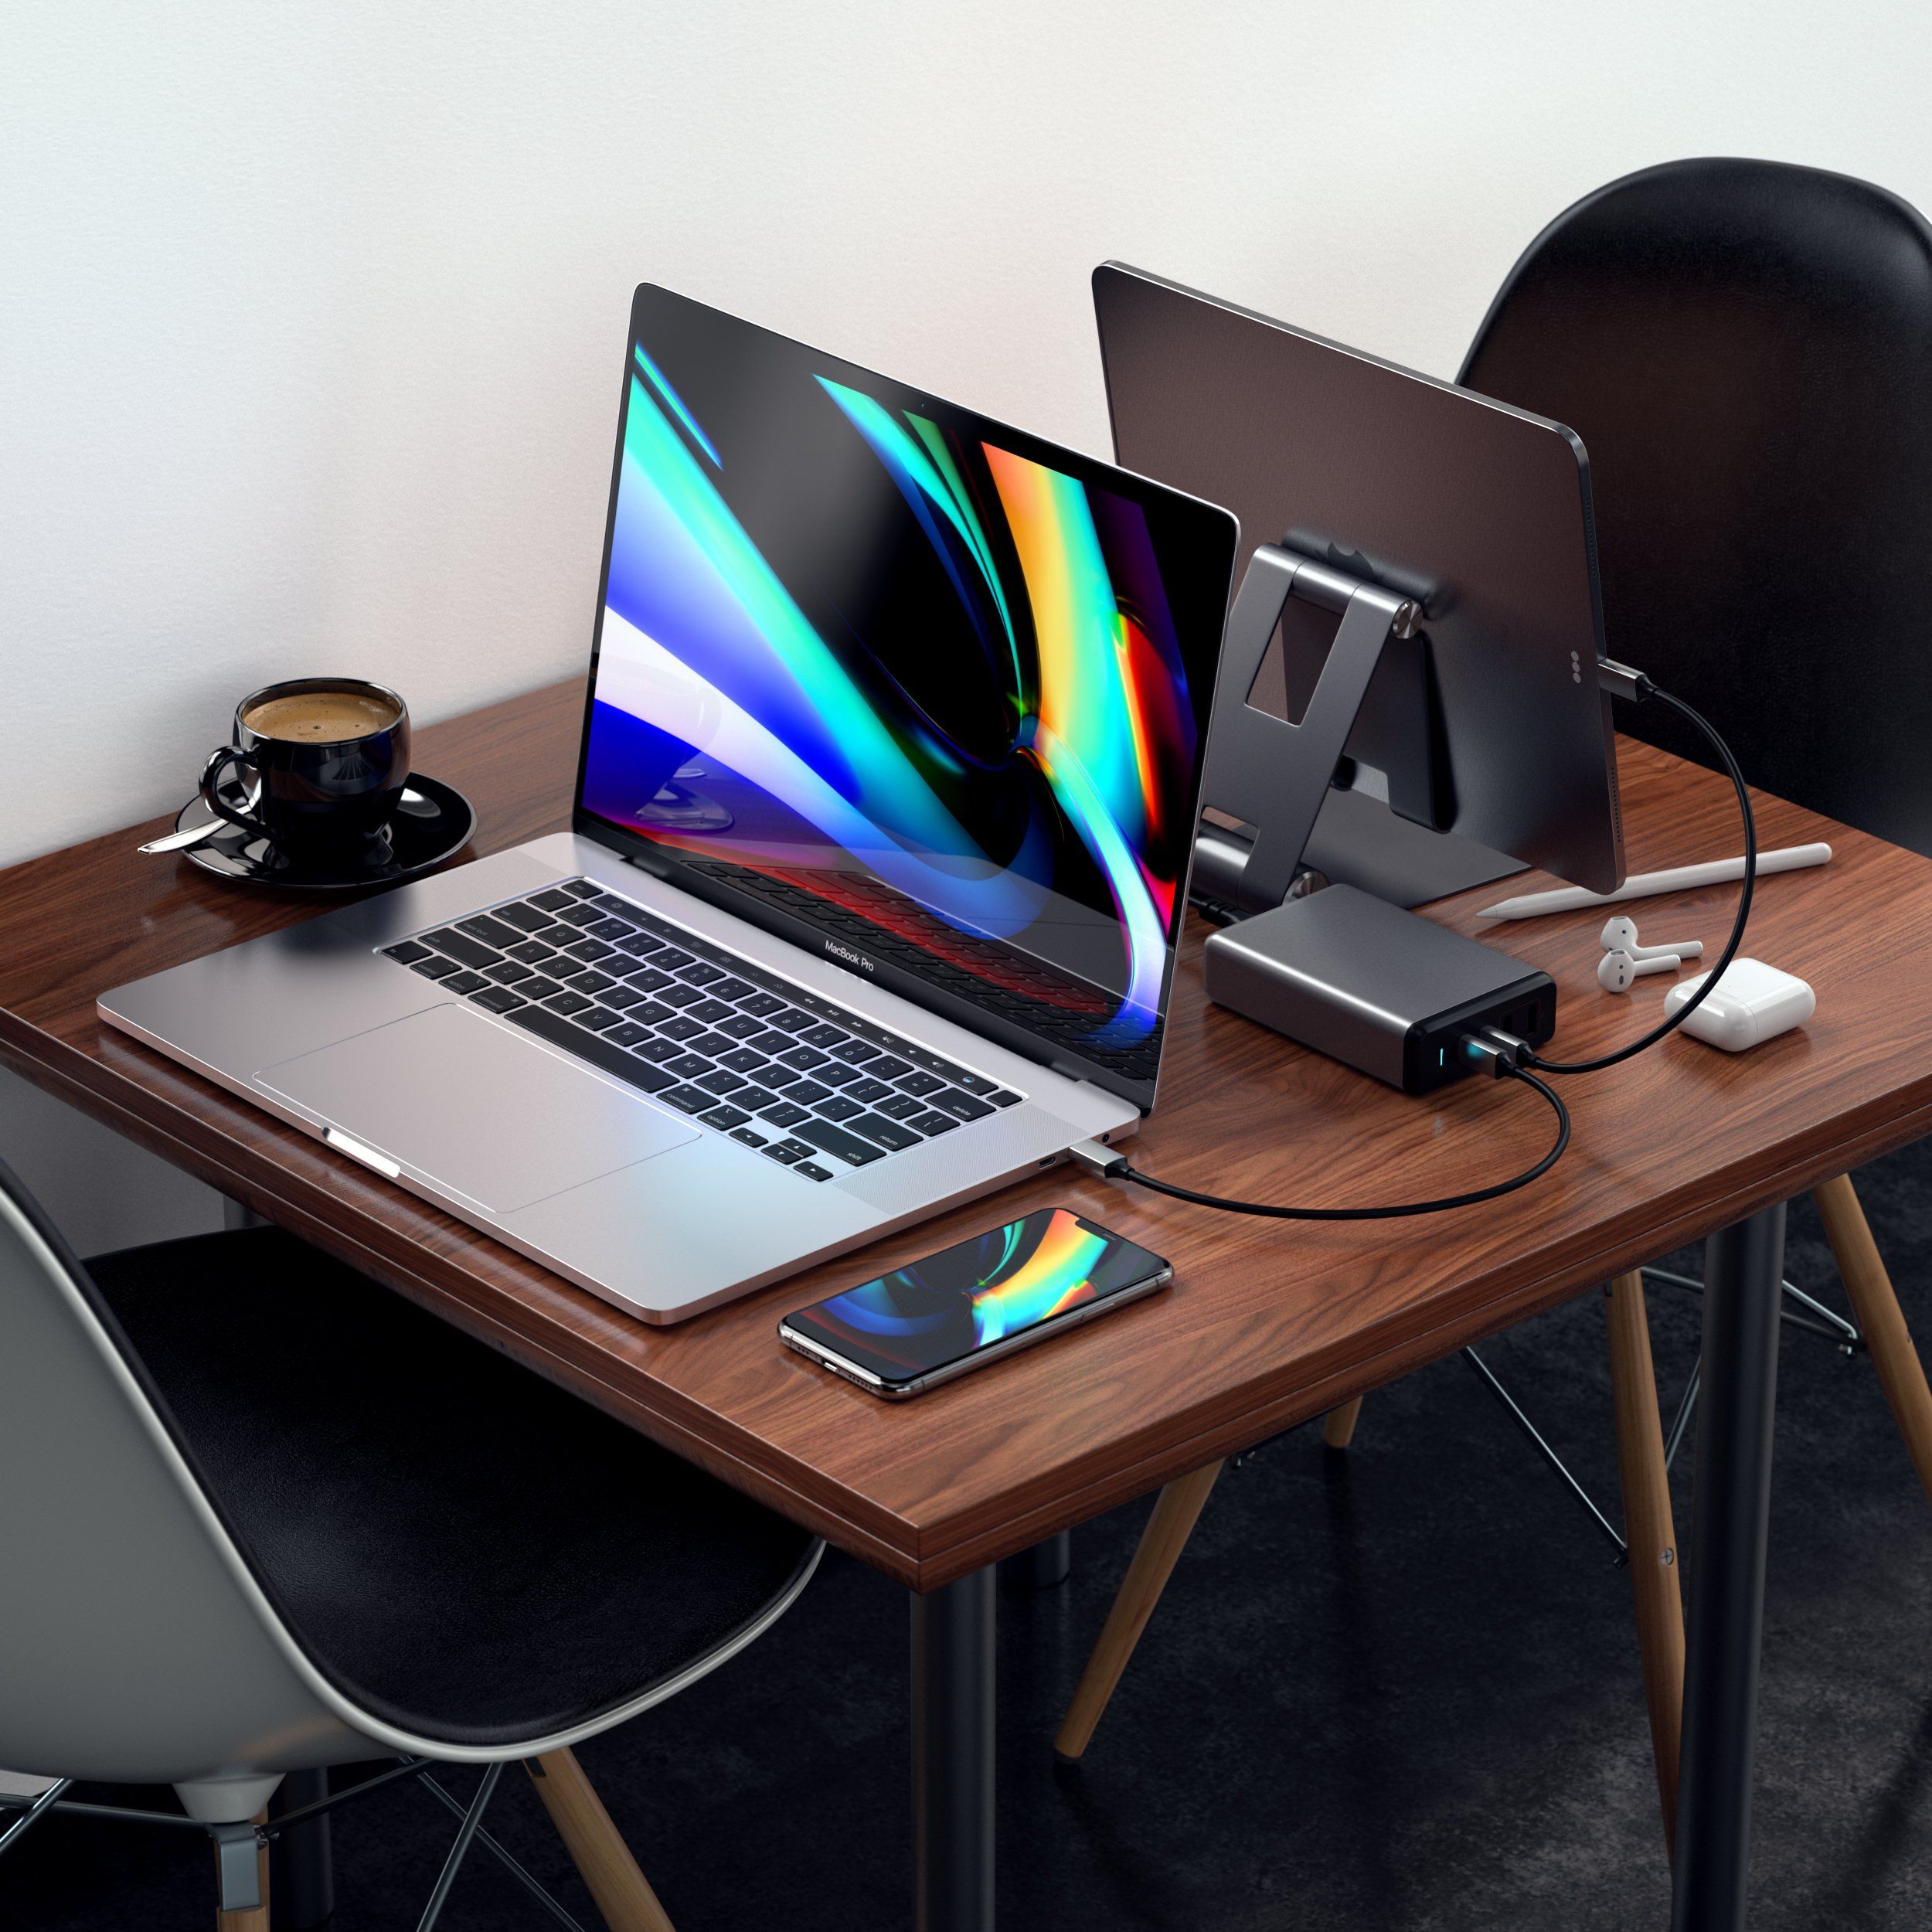 Satechi 108w pro usb-c pd desktop wall charger on a desk simultaneously charging a MacBook Pro and iPad Pro